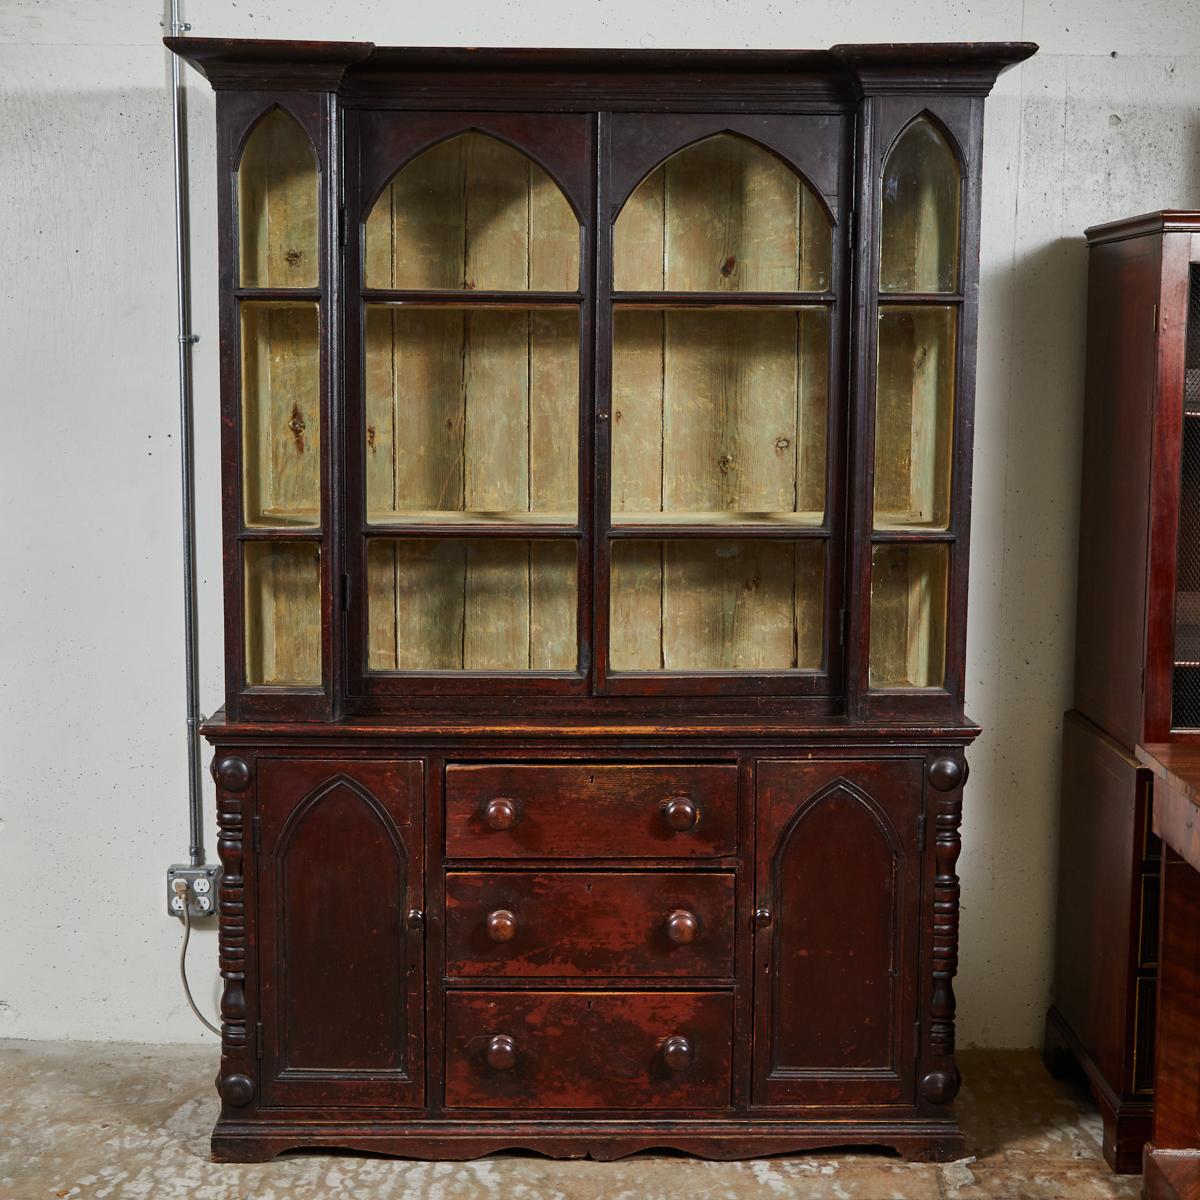 1840s English painted Cornish dresser. Can be used as a china cabinet, cupboard, or bookcase also.